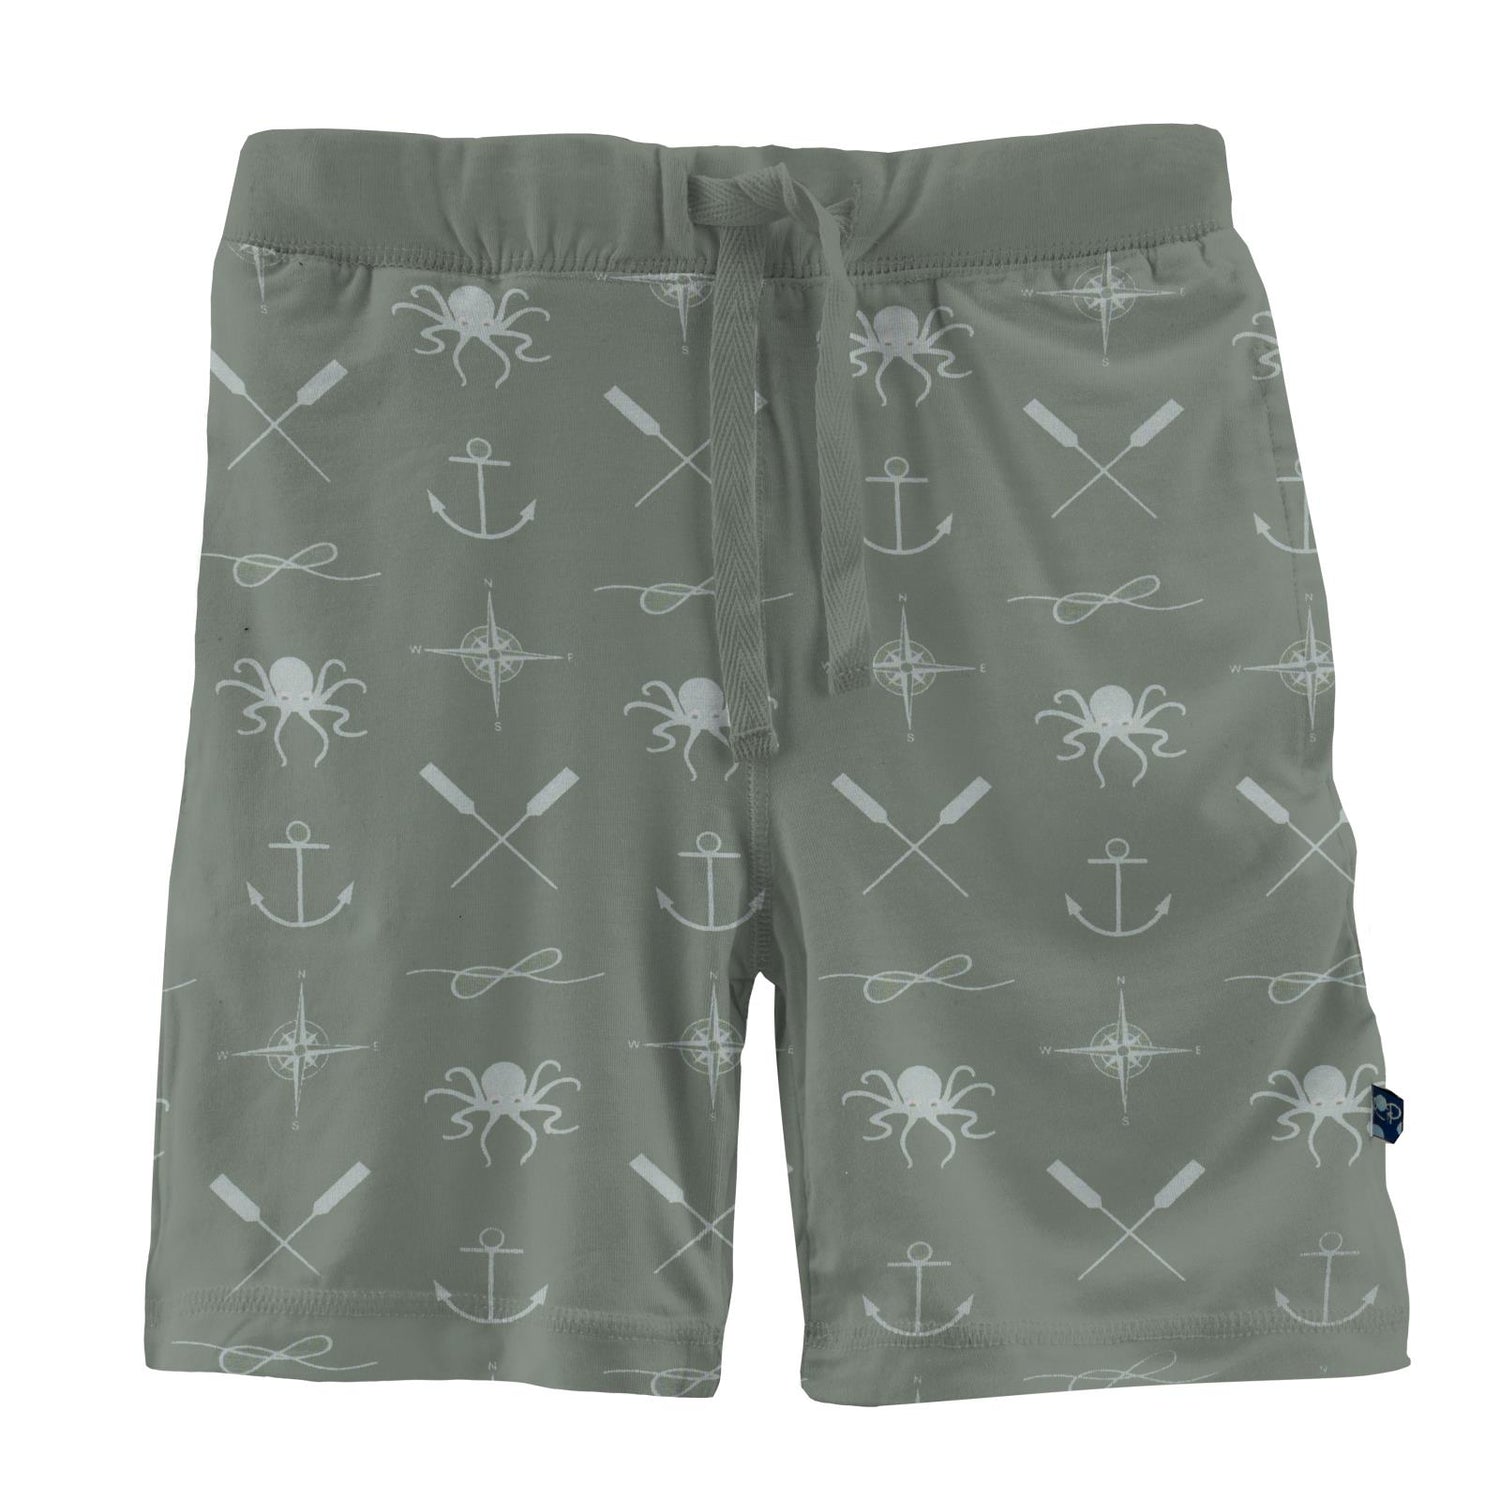 Print Lightweight Drawstring Shorts in Lily Pad Captain and Crew